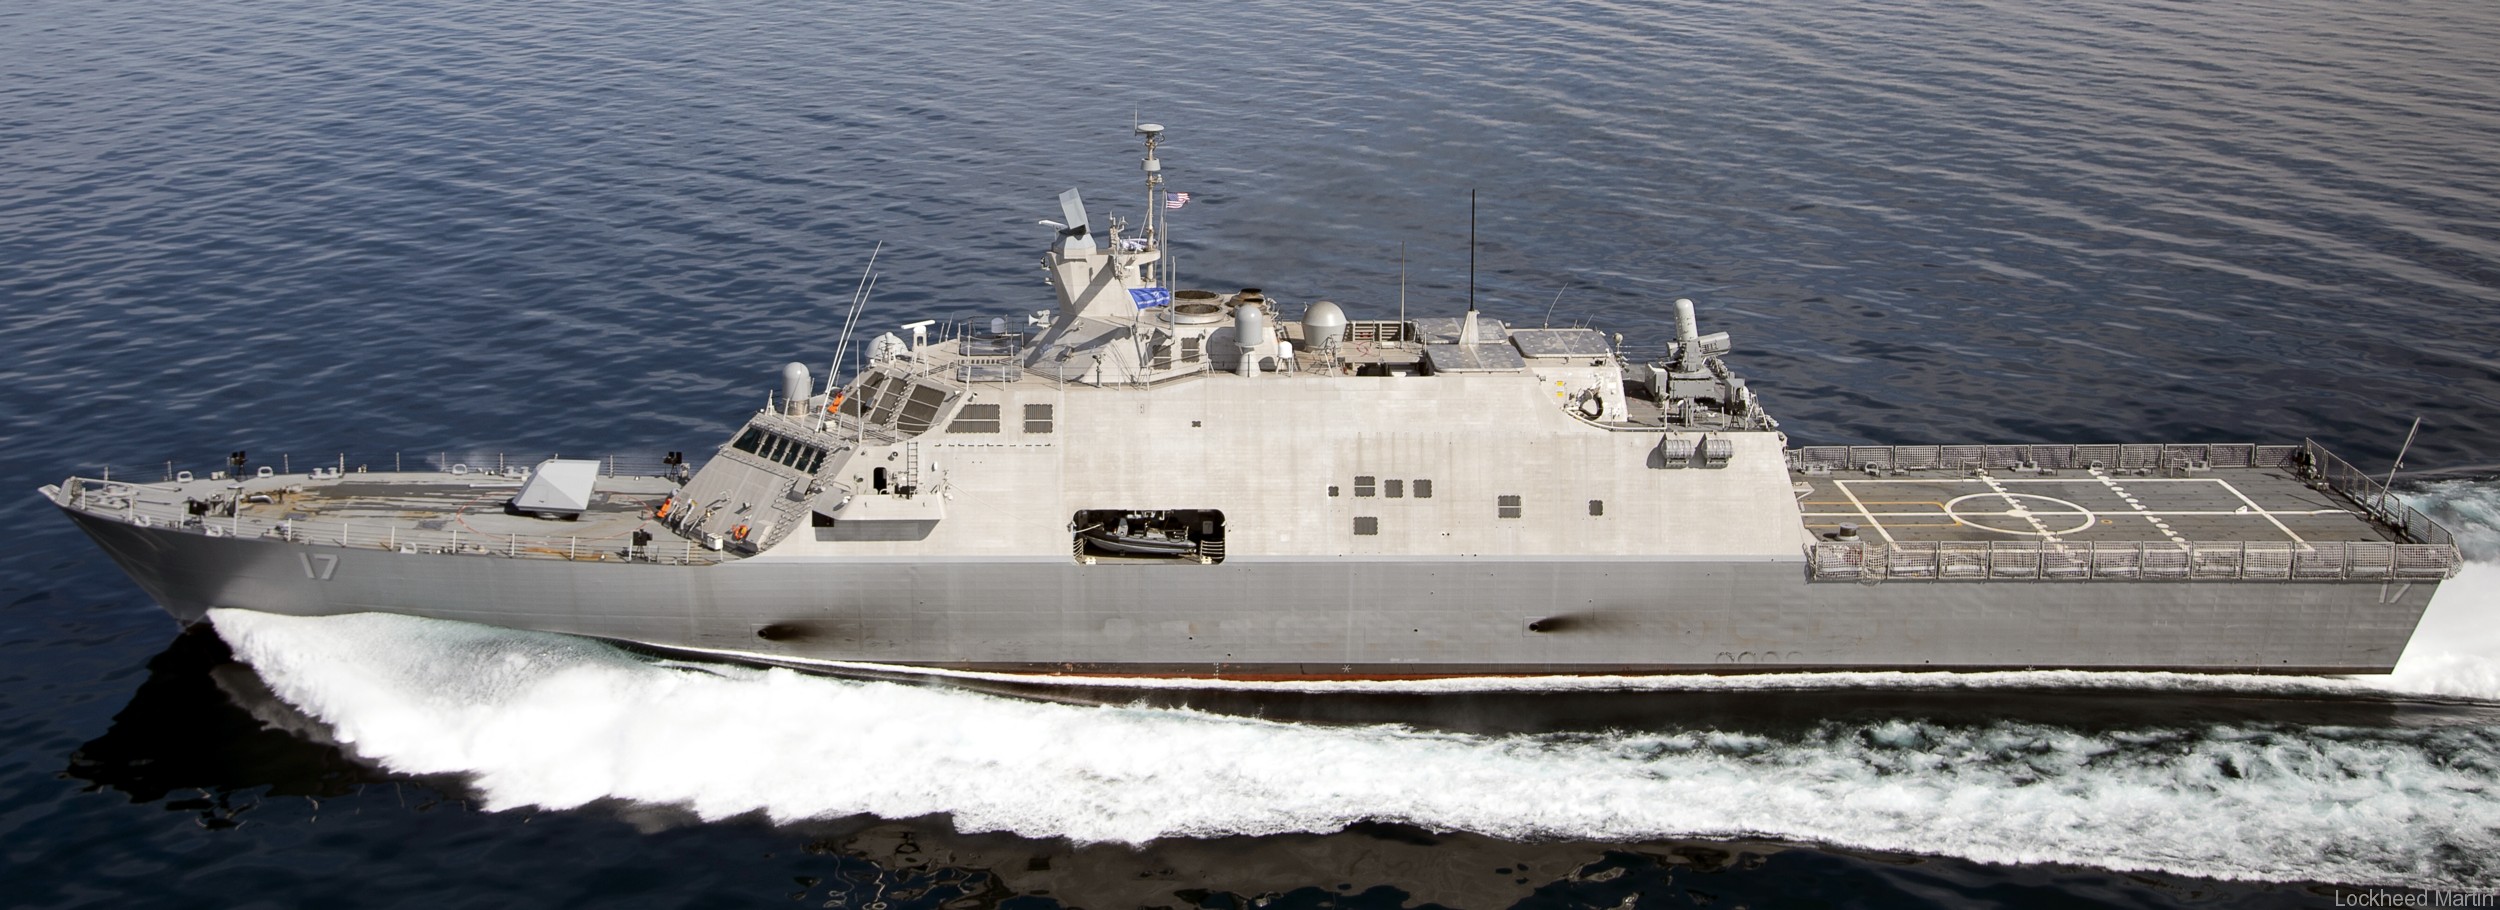 lcs-17 uss indianapolis freedom class littoral combat ship us navy 21 acceptance trials lake michigan